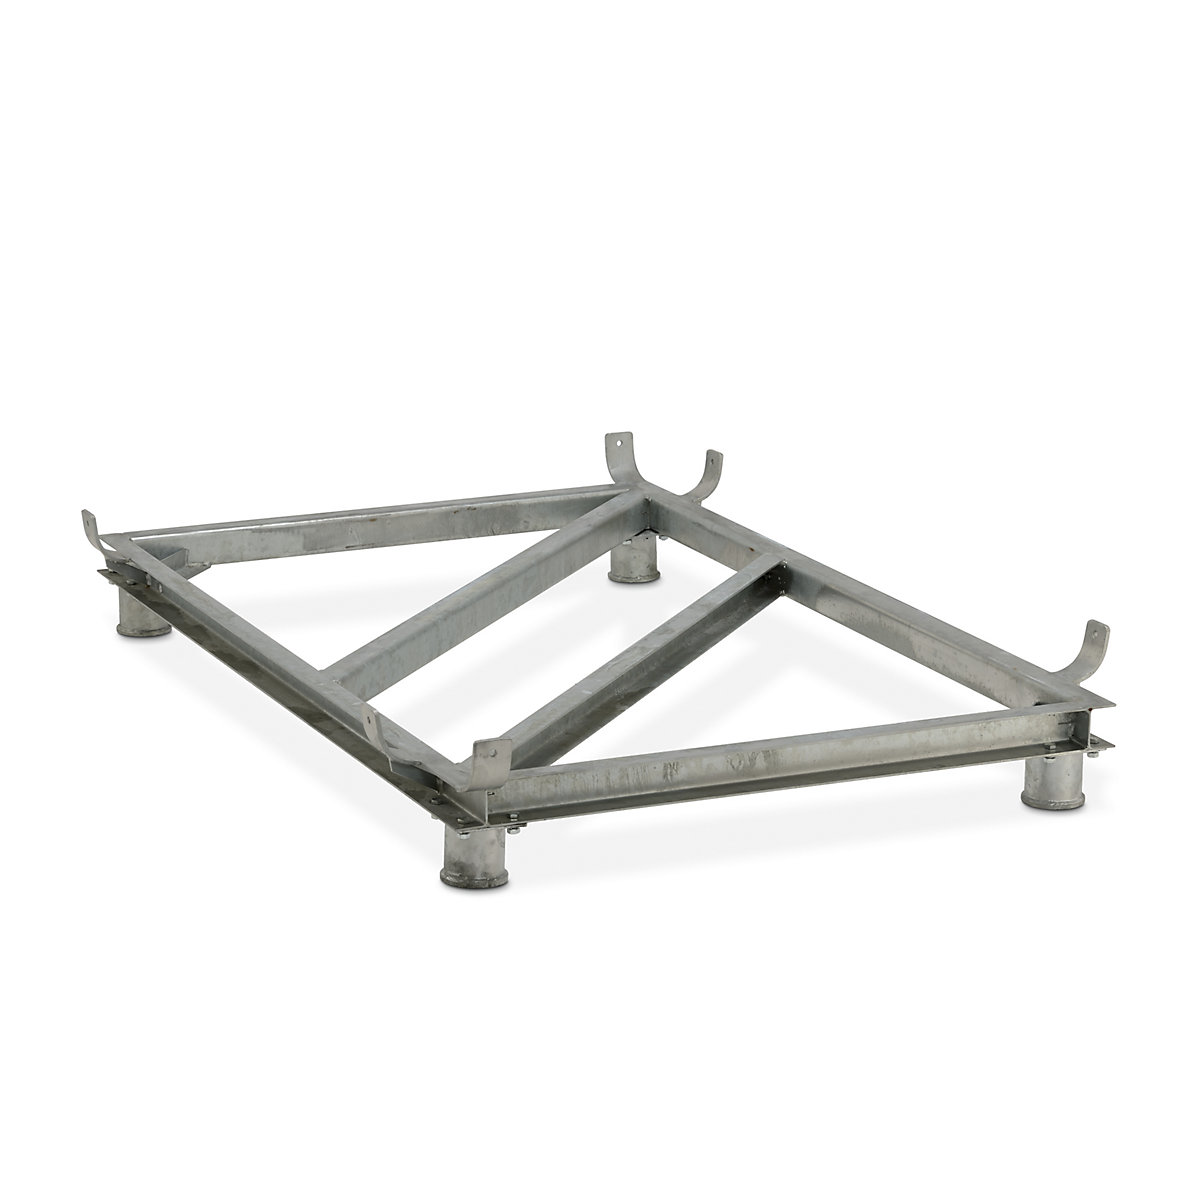 Steel base frame – CEMO, zinc plated, for LxW 2108 x 1480 mm, capacity 2200 litres